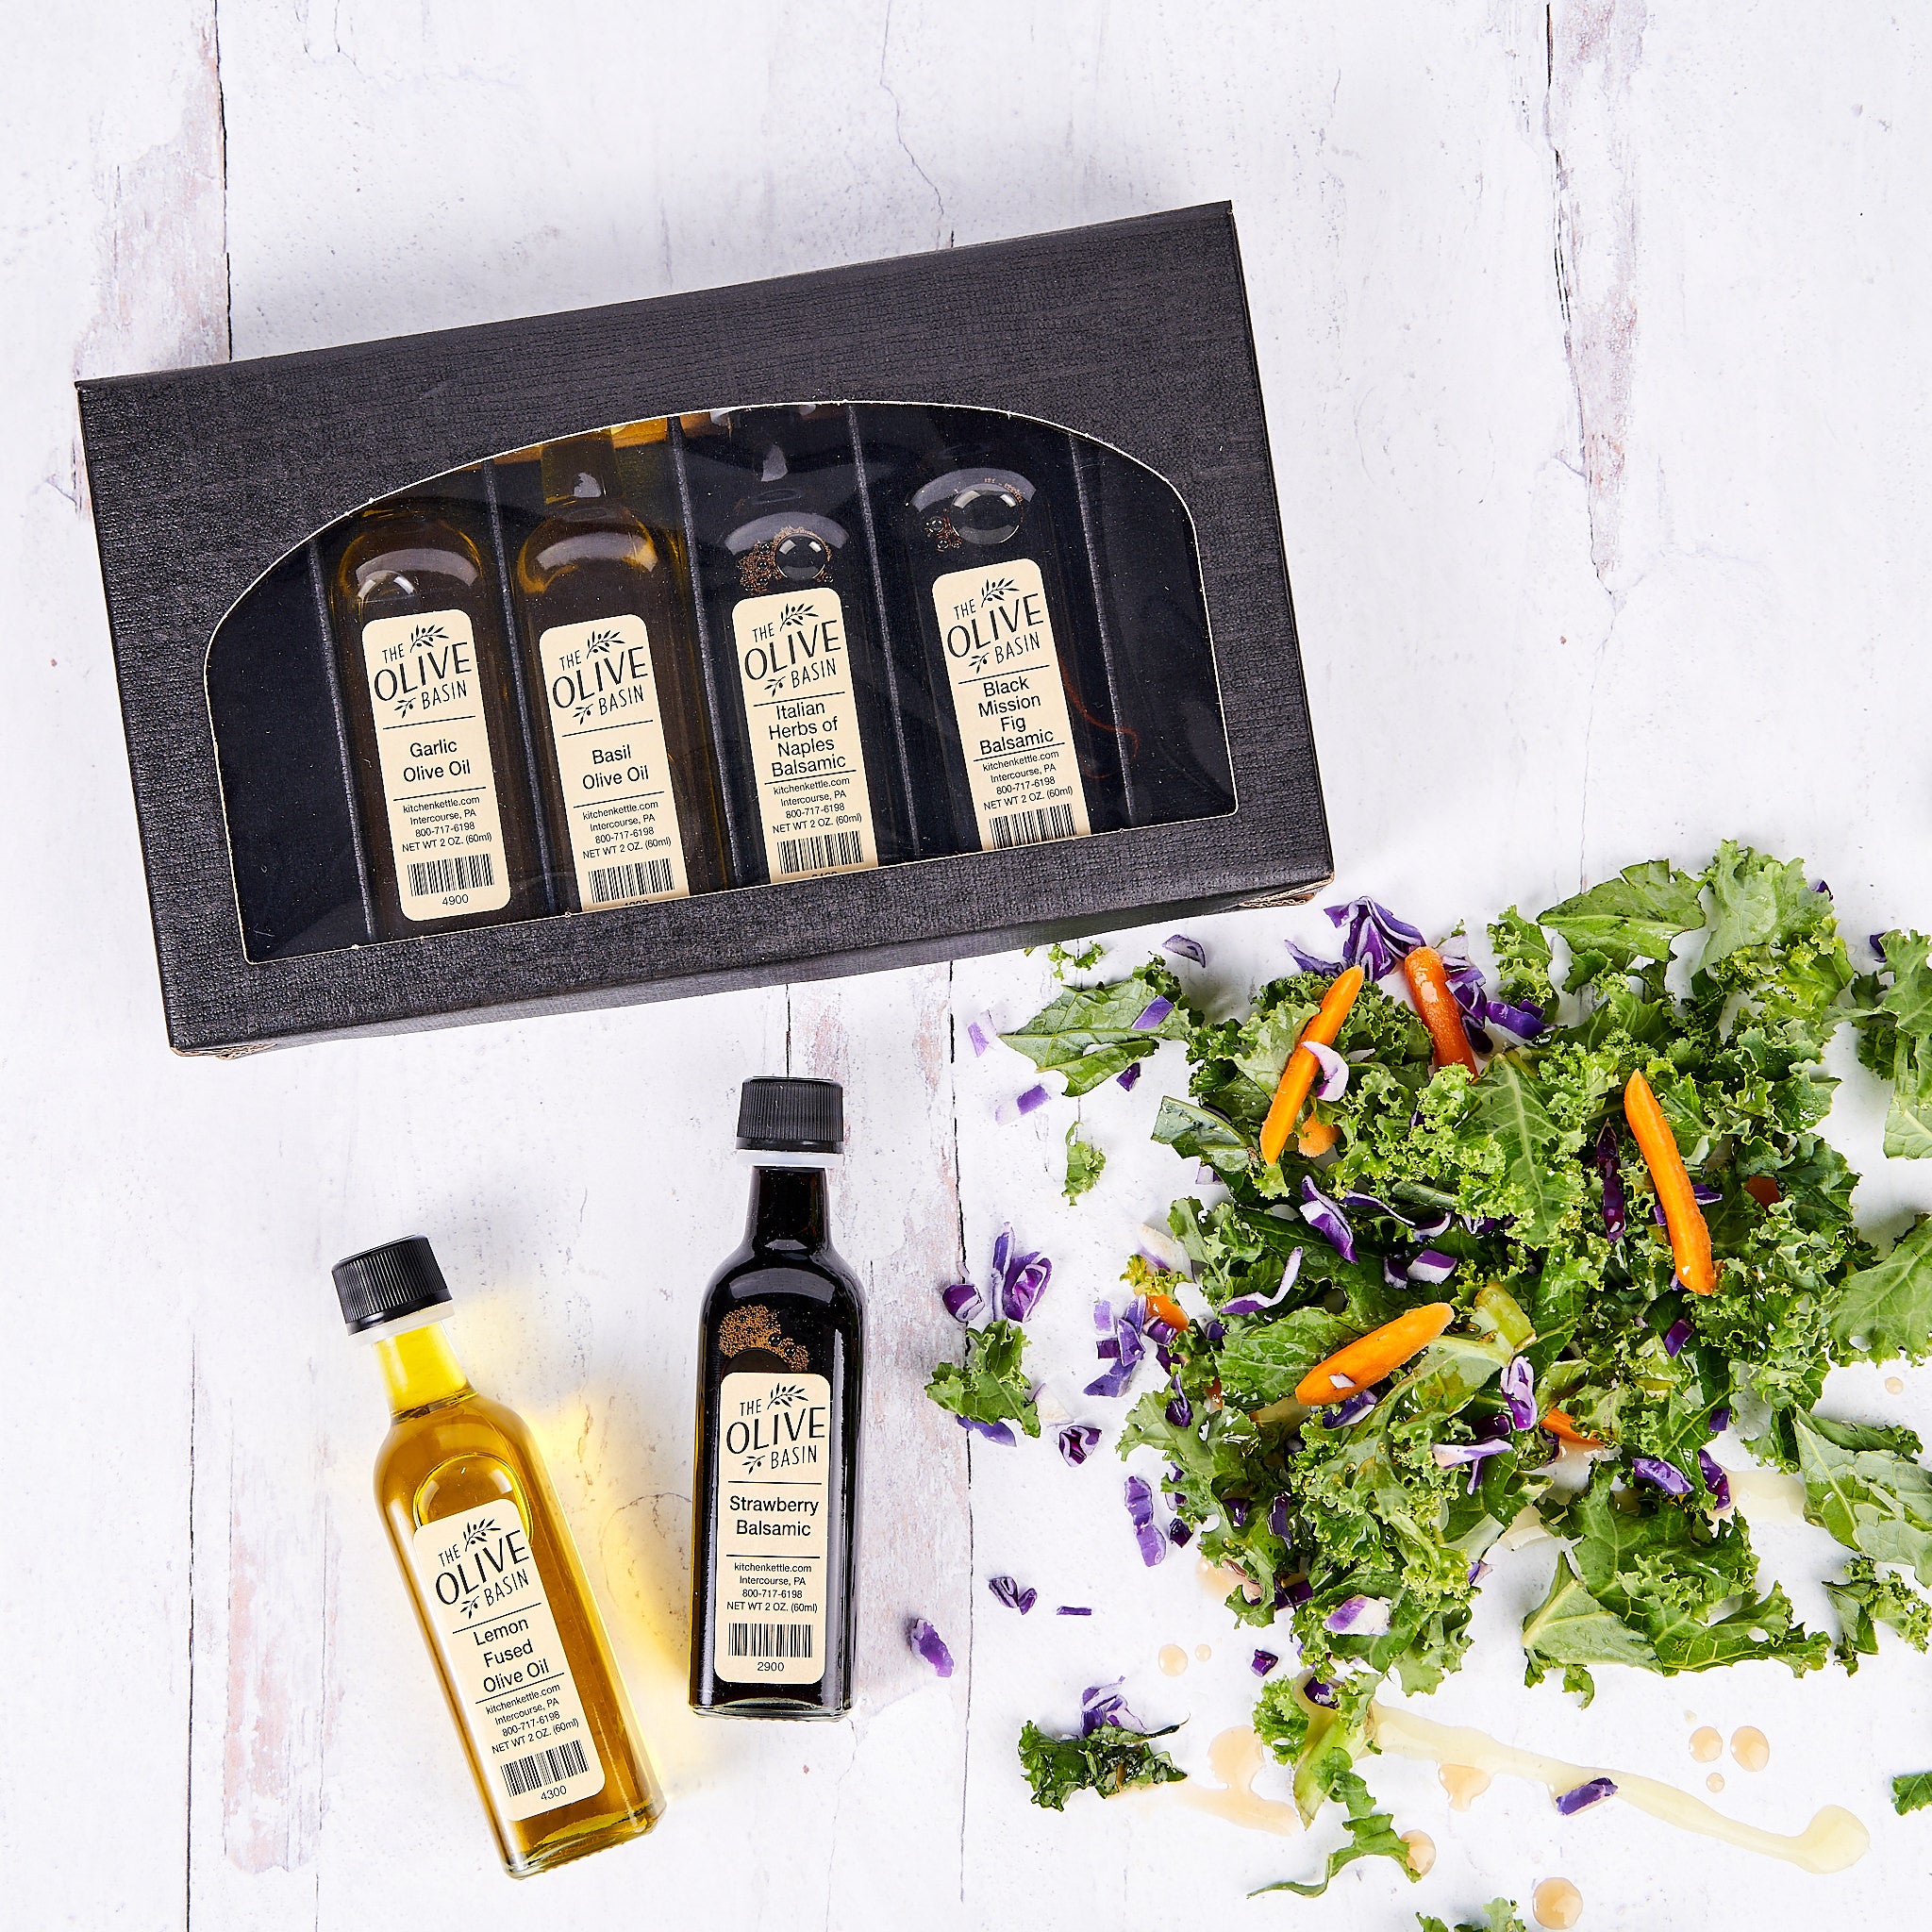 60ml Olive Oil and Balsamic Gift Set - The Olive Bar